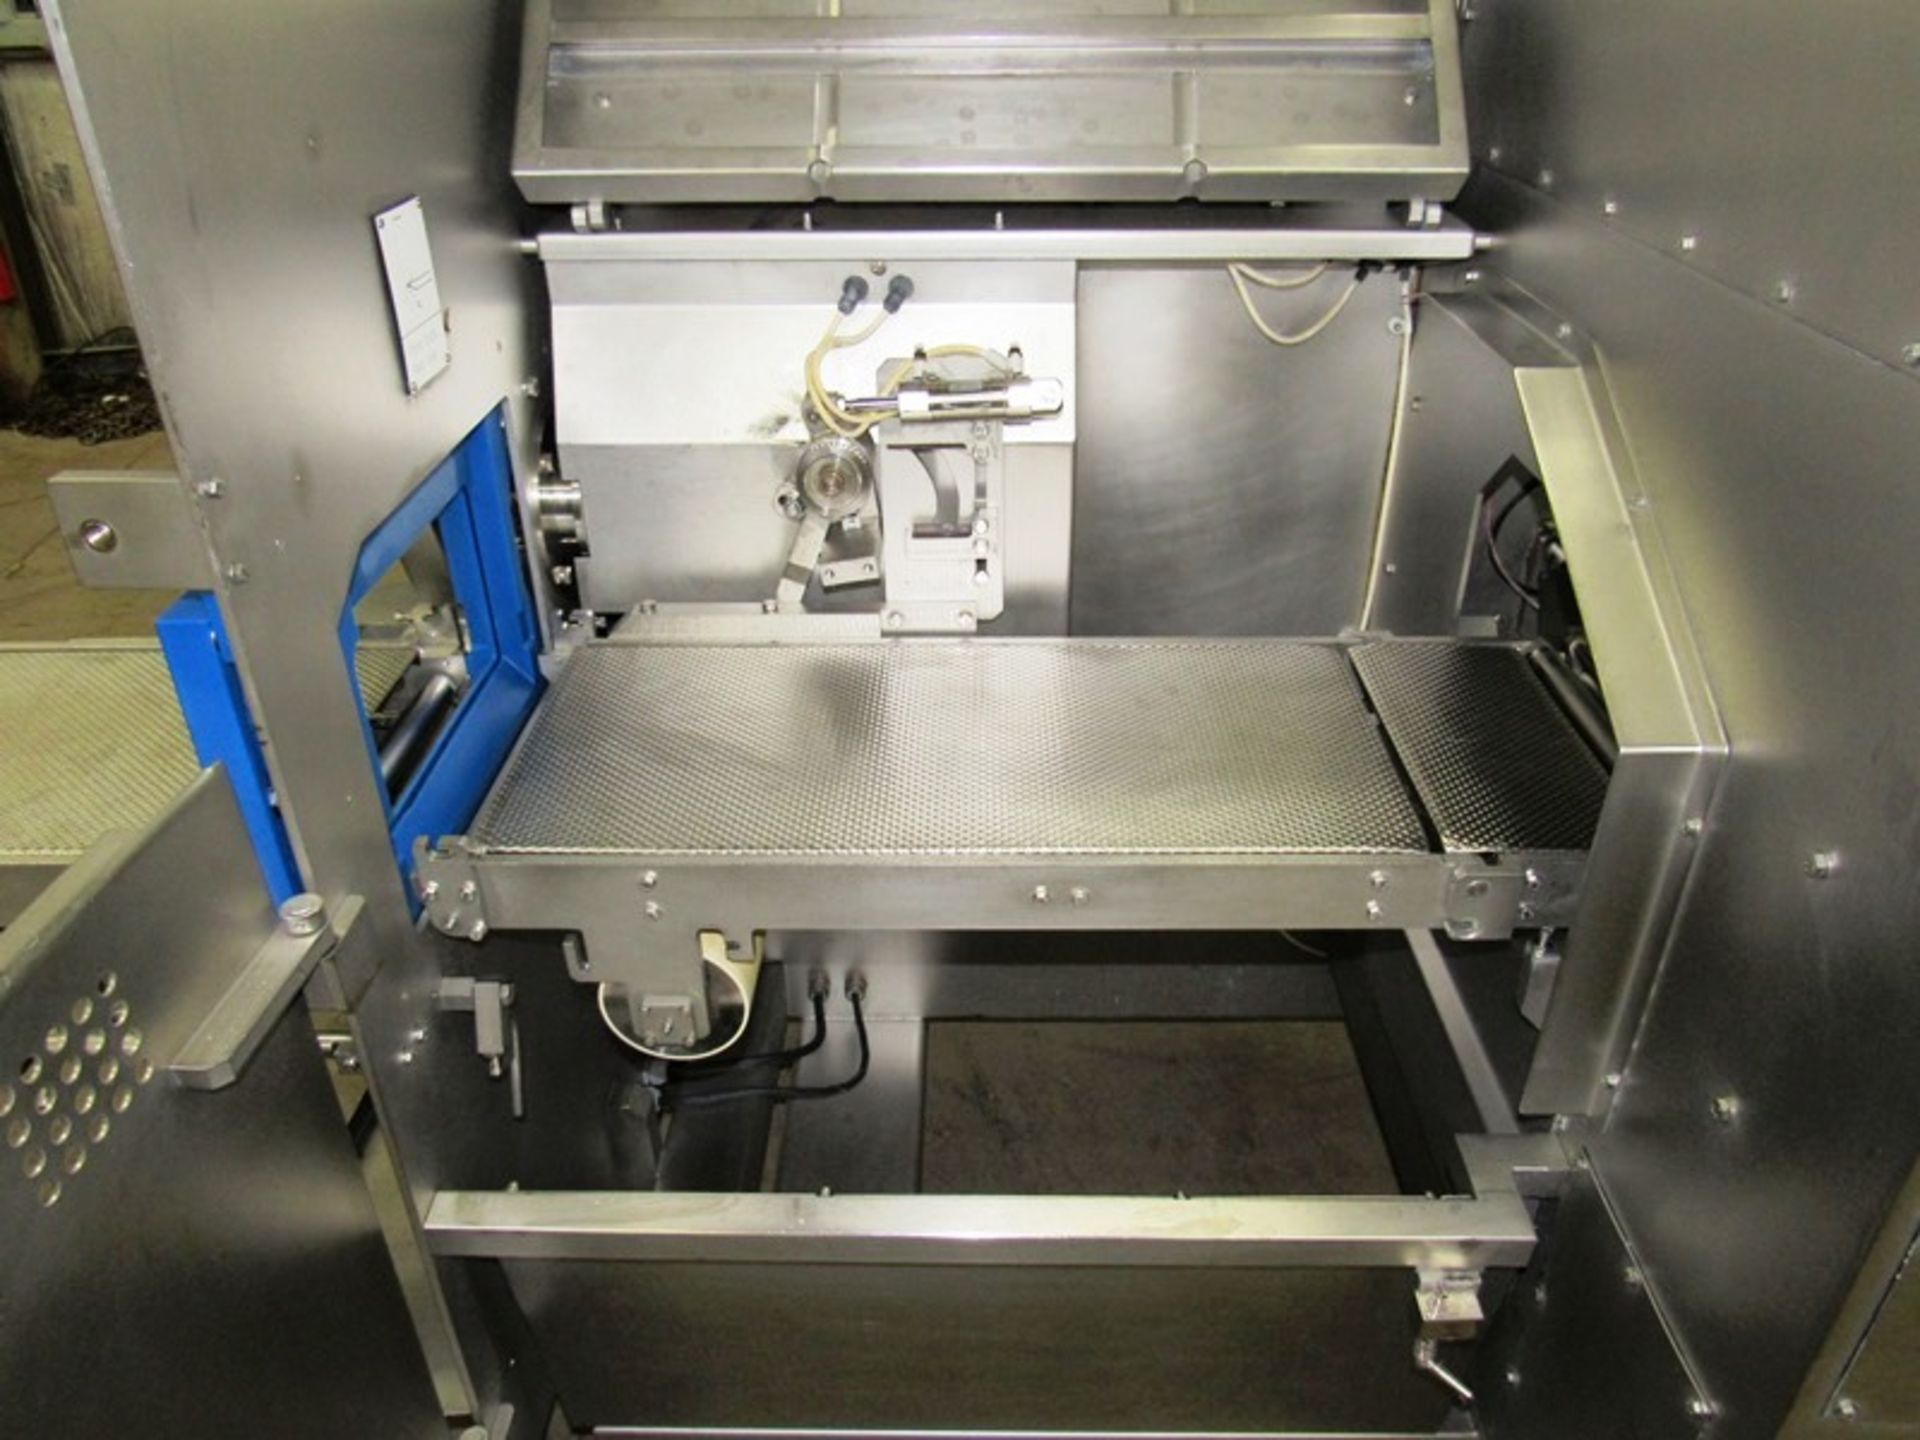 AEW Delford Mdl. SSV Vision Slicer for fresh, non frozen meats, equipped with (3) digital - Bild 16 aus 17